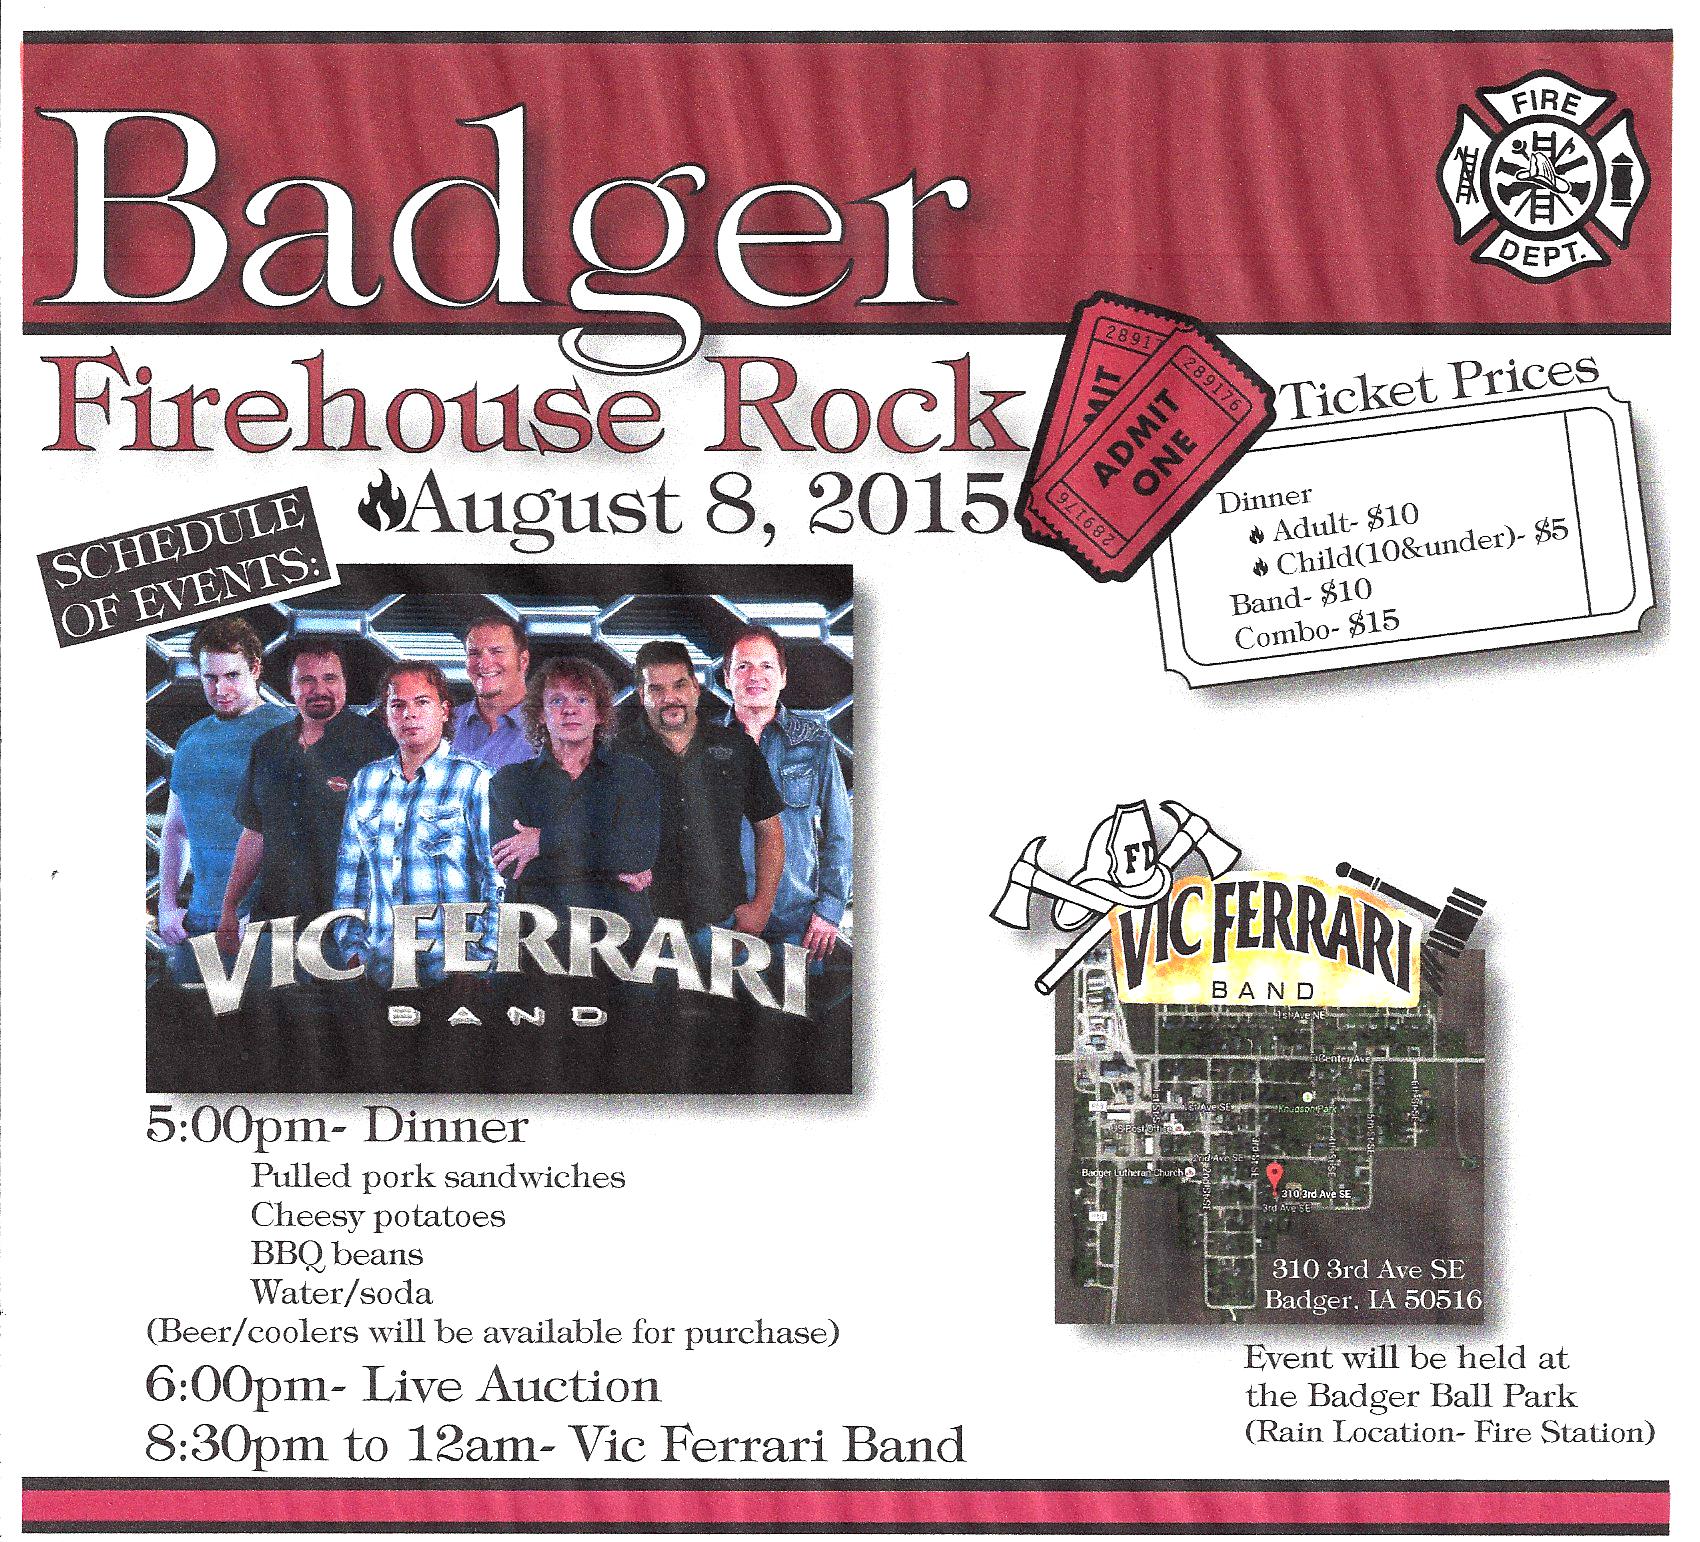 Firehouse Rock and Vic Ferrari Band Information